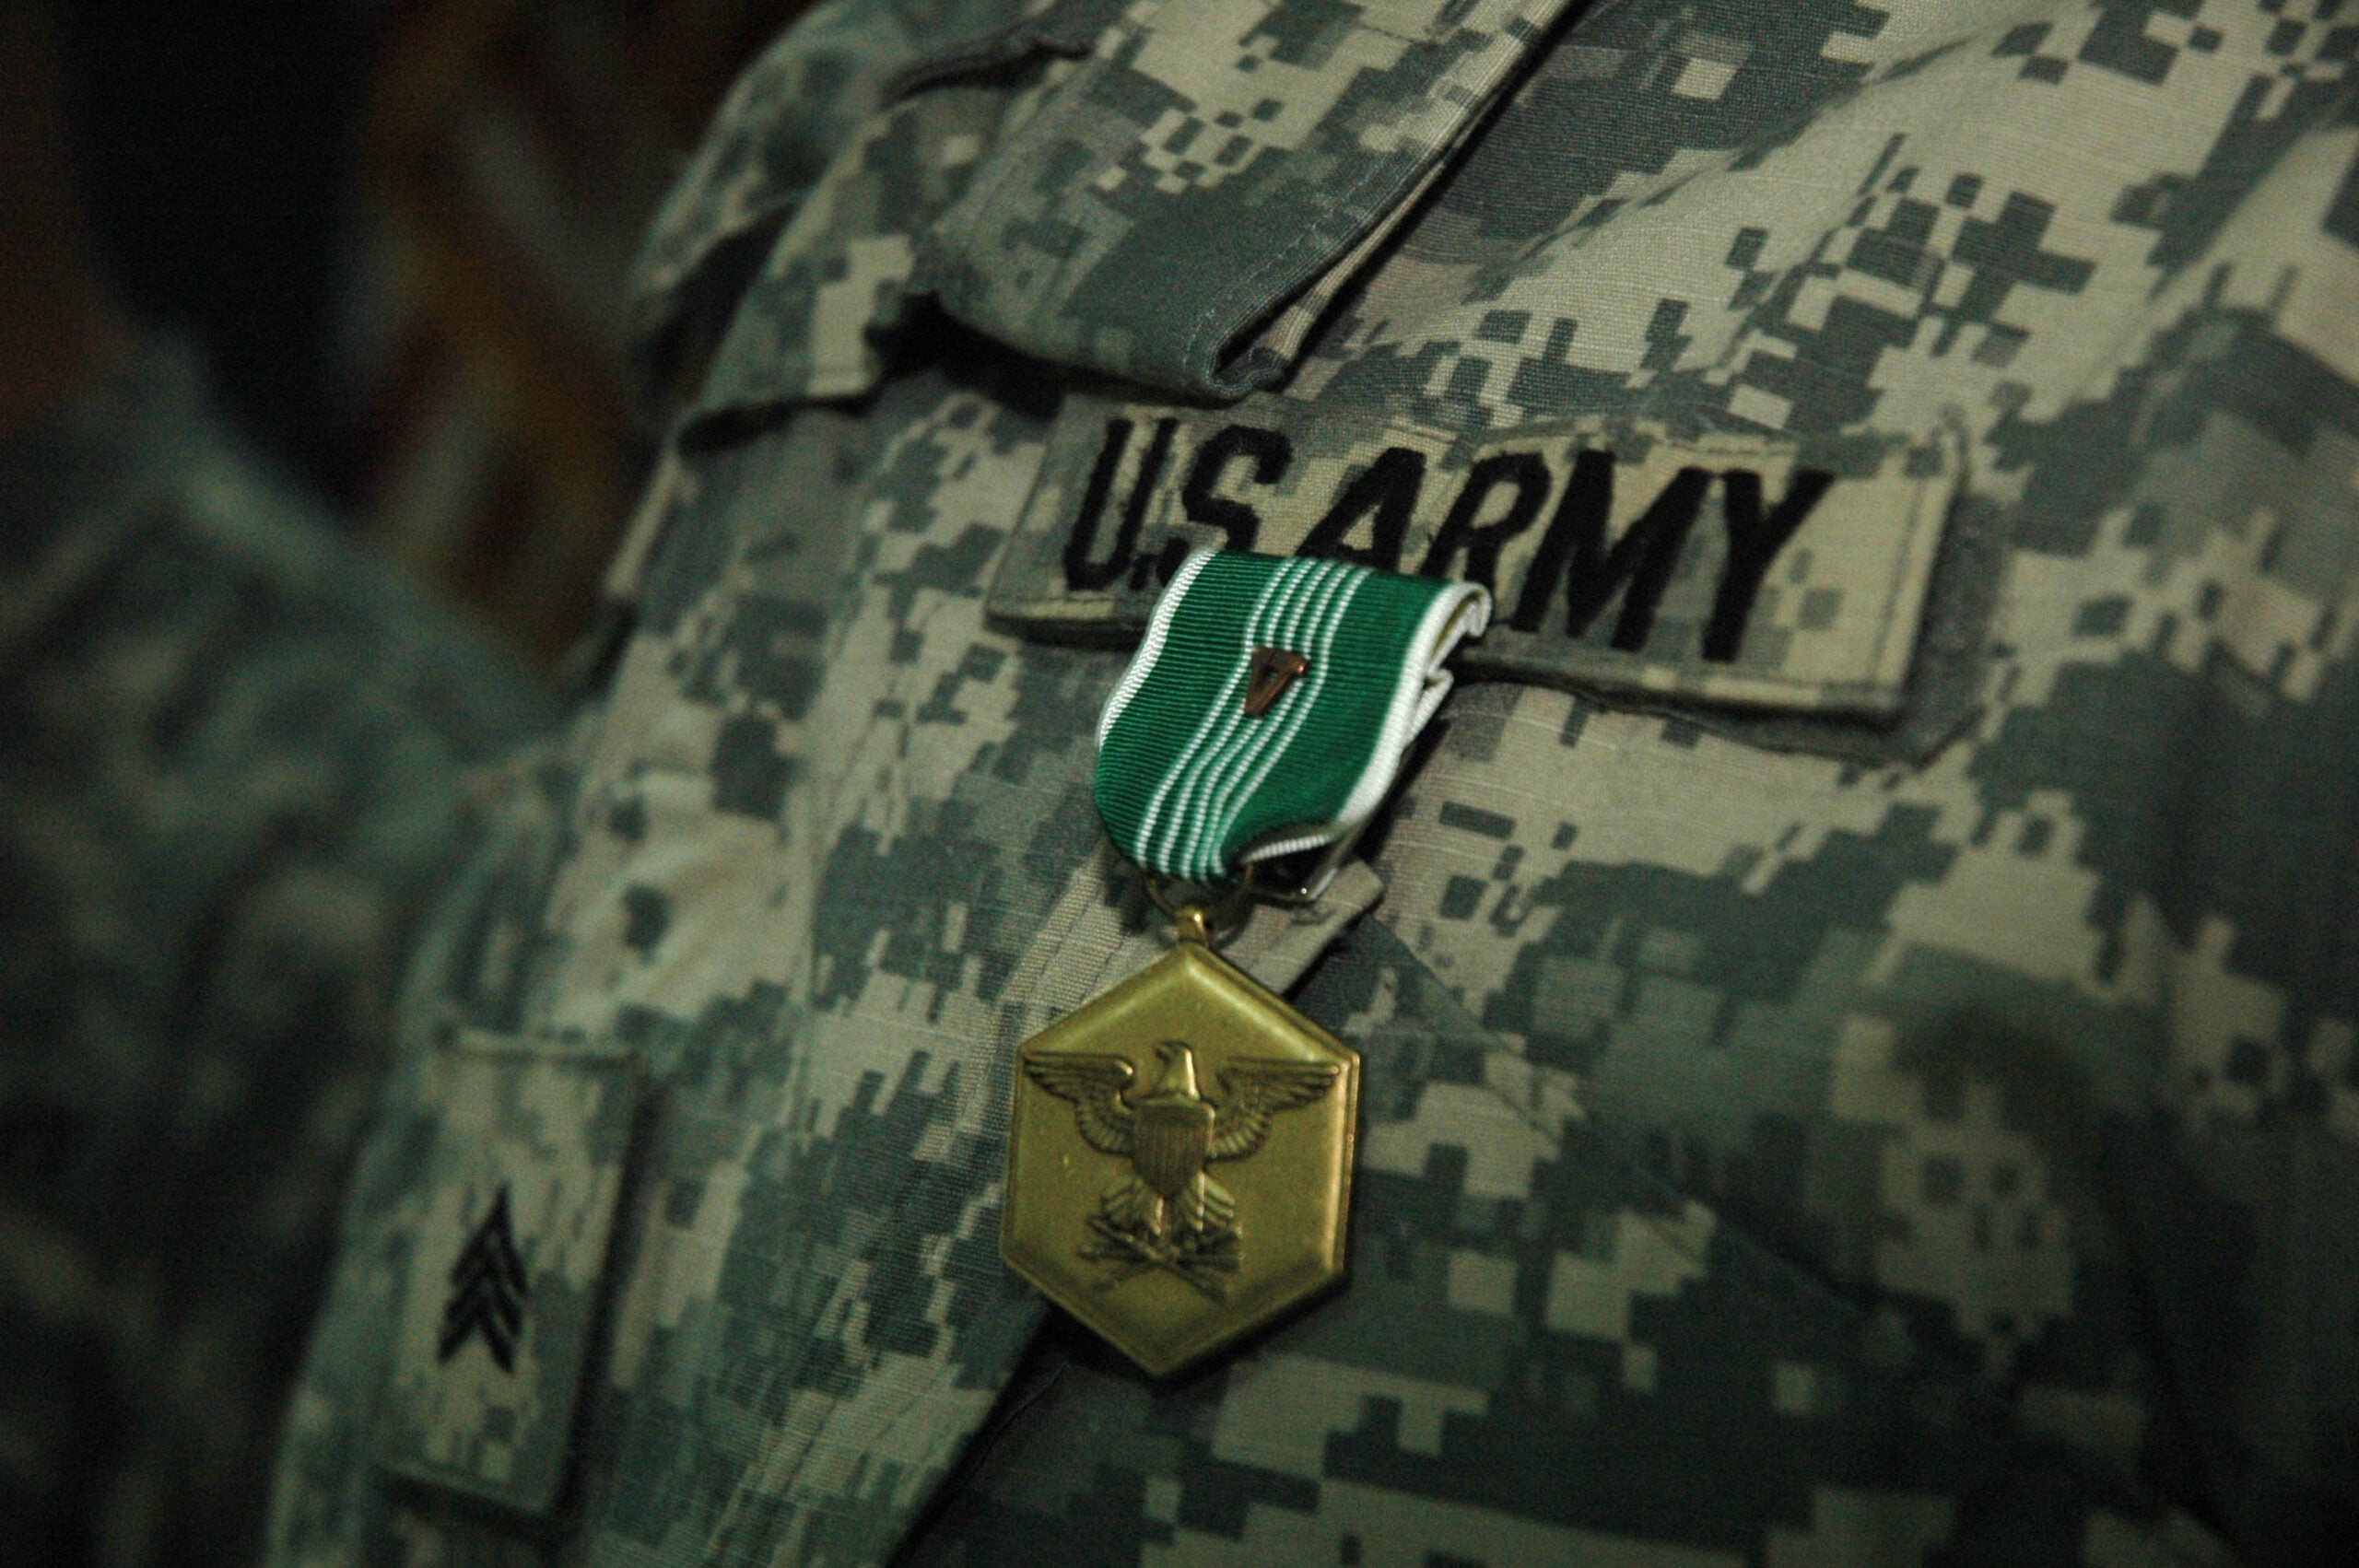 Army Major Gen James Simmons deputy commanding general for Multi National Corps Iraq awarded one Bronze Star Medal and eight Army Commendation Medals with Survivor Tech A brief history of valor awards in the American military